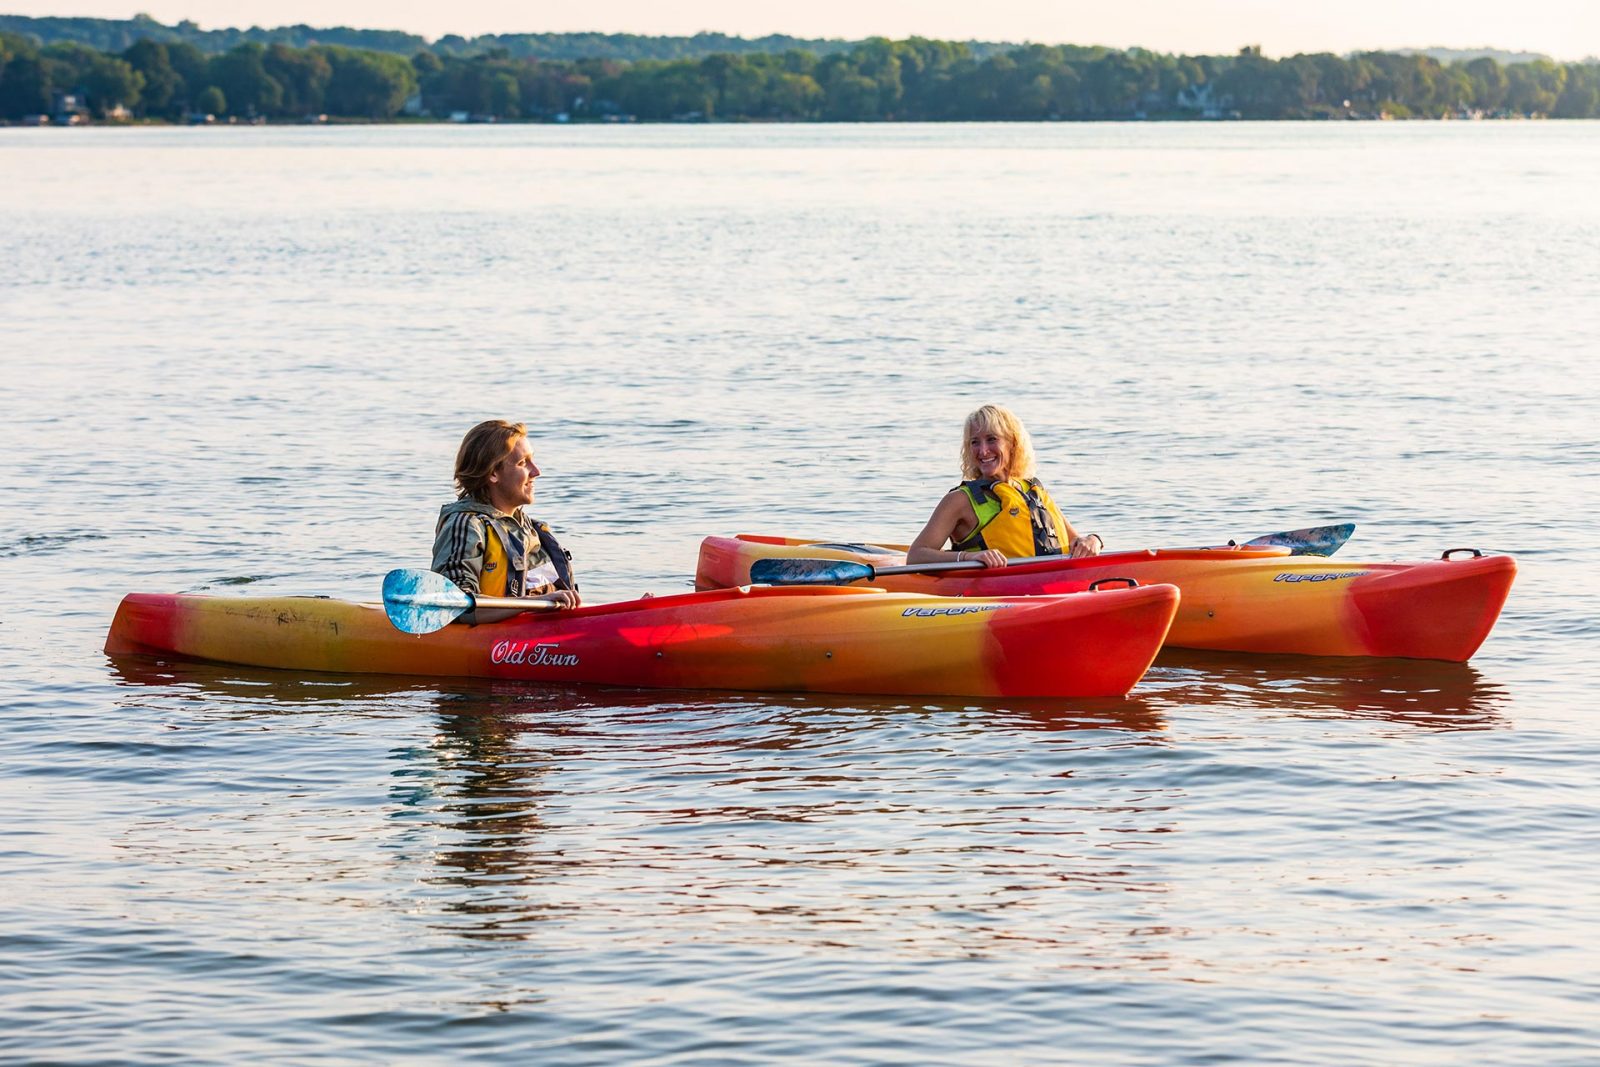 two people in a red and yellow kayak in the water.